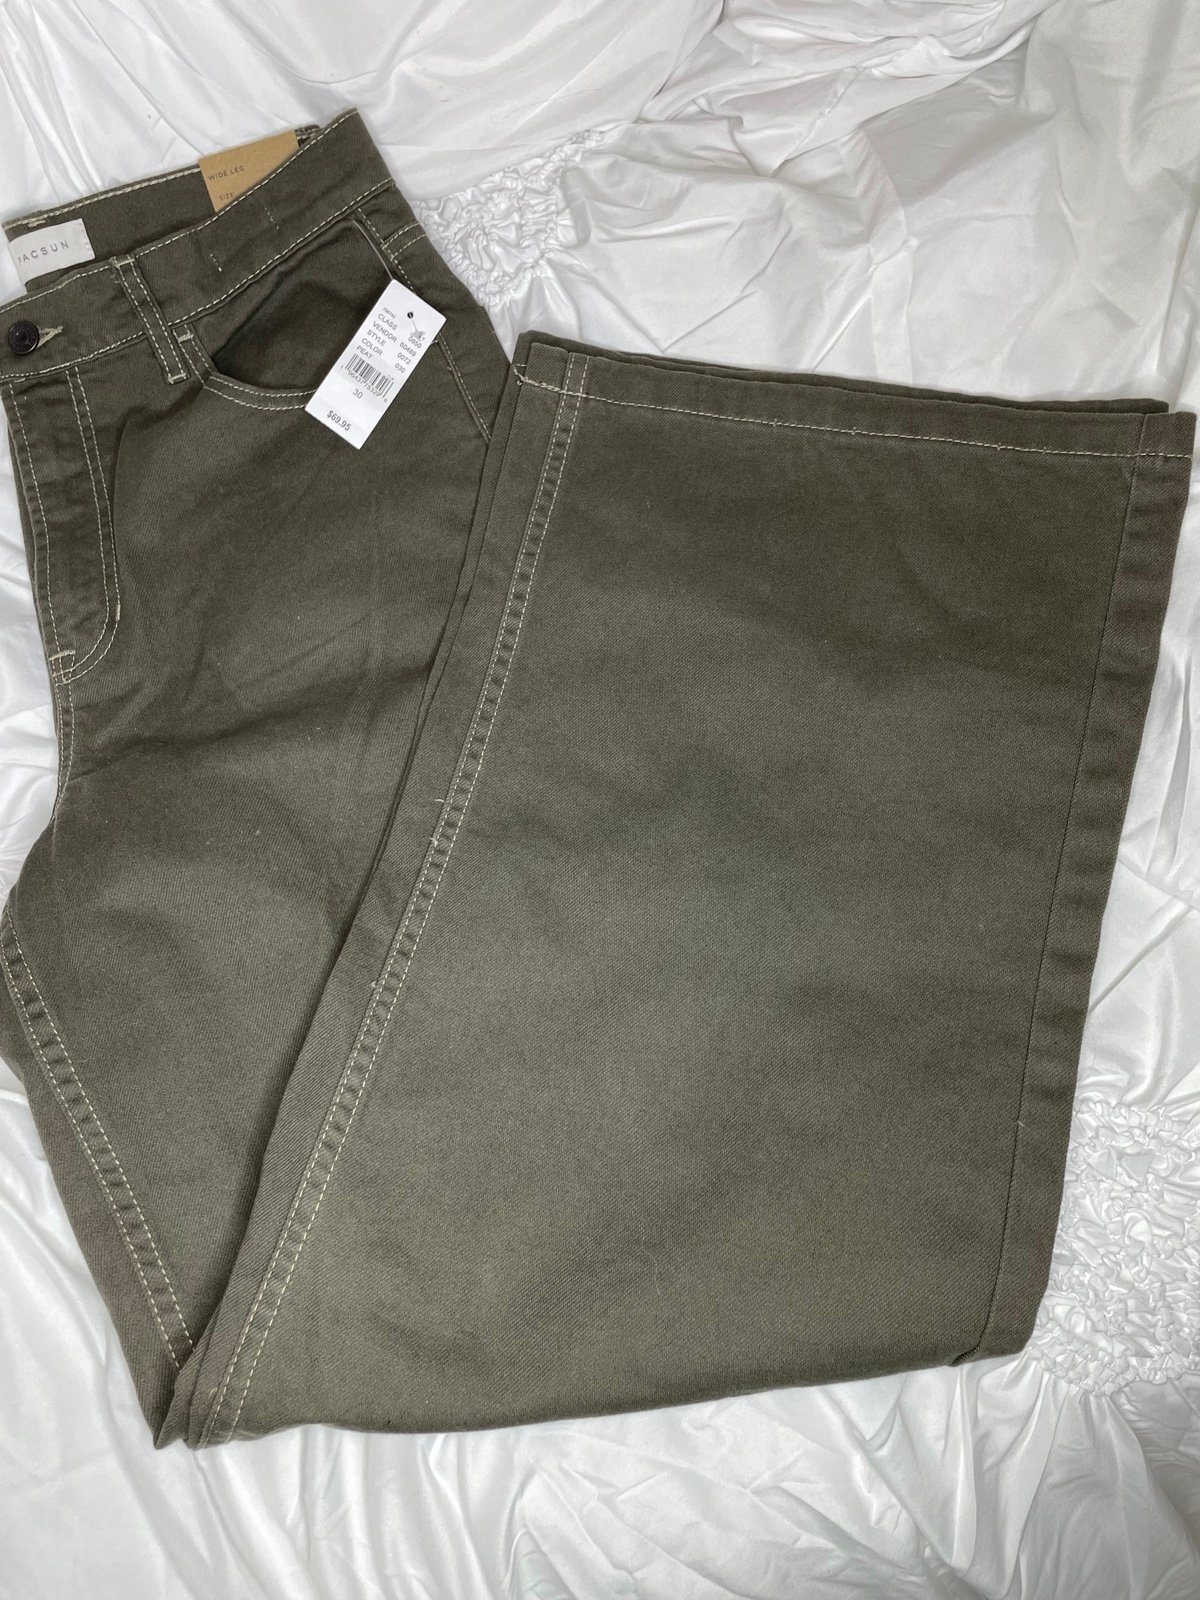 The Best Seller Green cargo pants with crème hemming PM0CX0Jhg Counter Genuine 